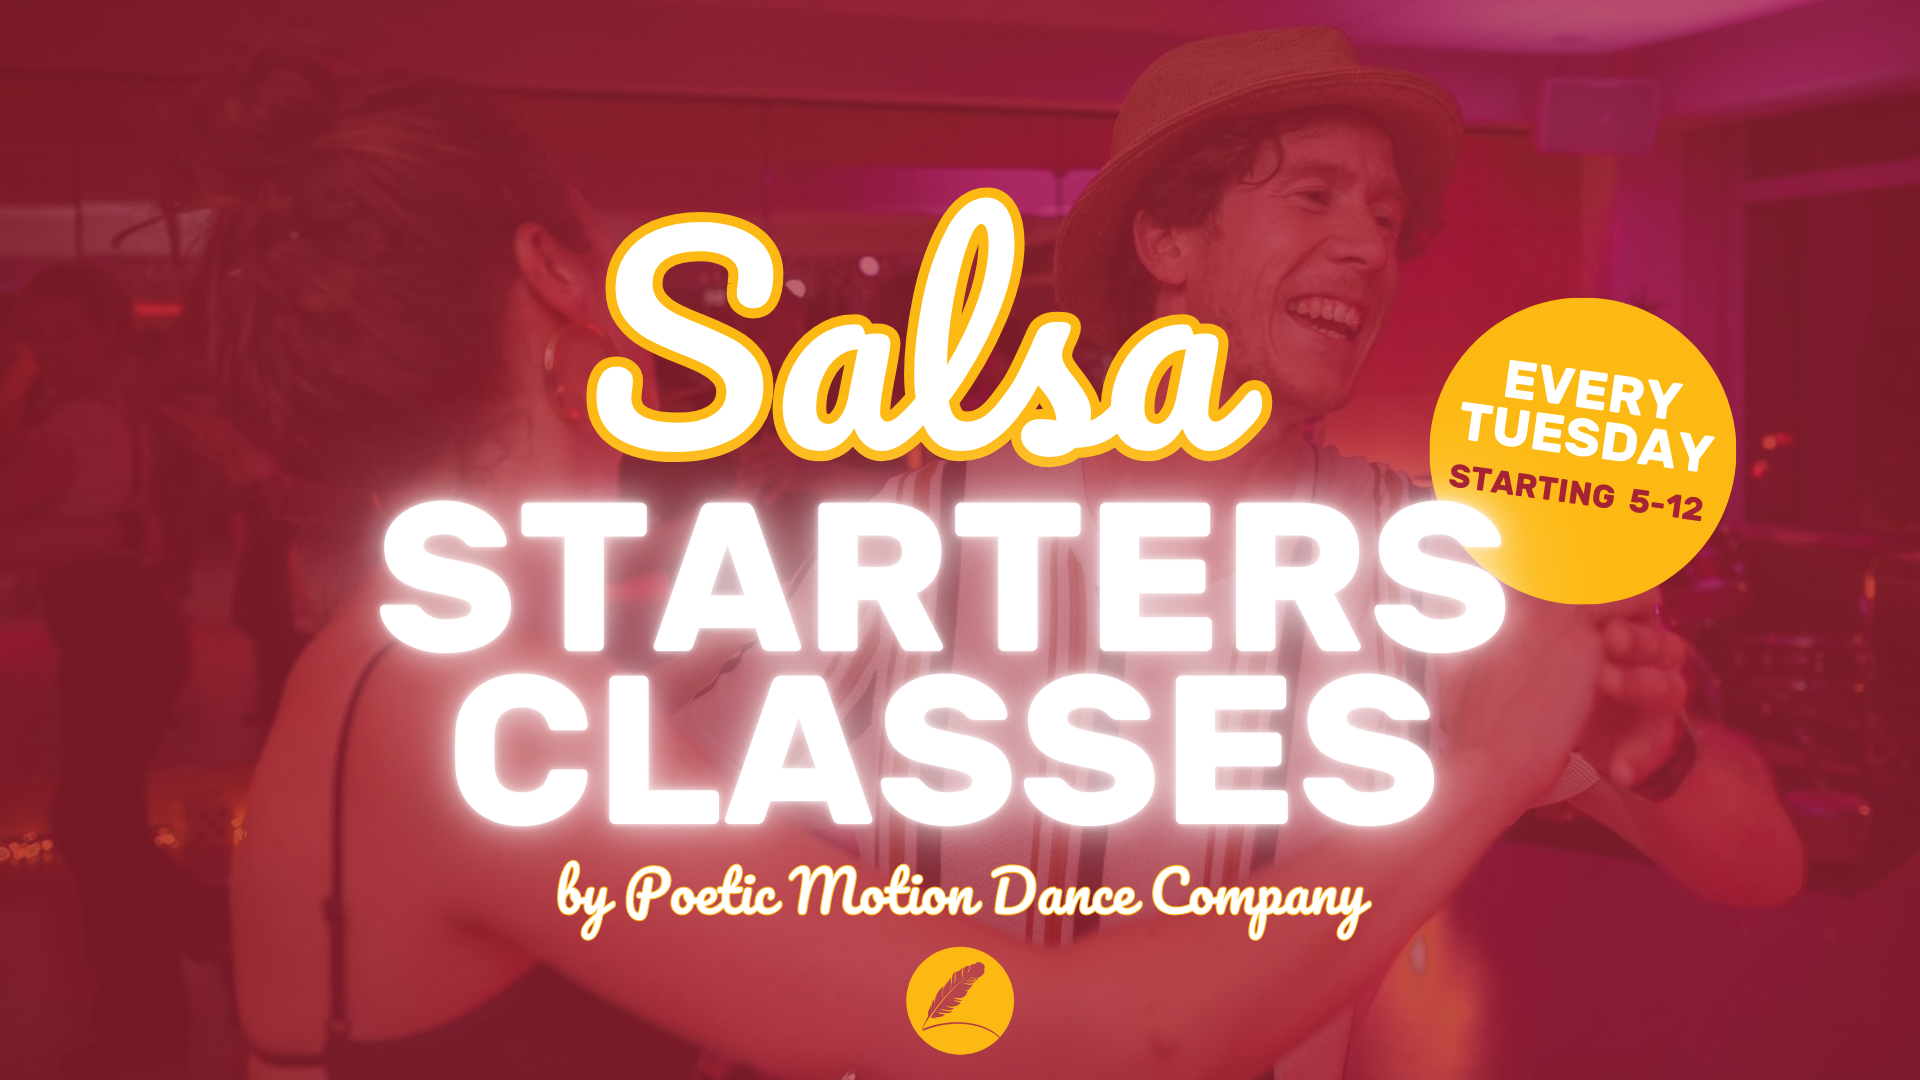 New Salsa Starters Classes on Tuesday